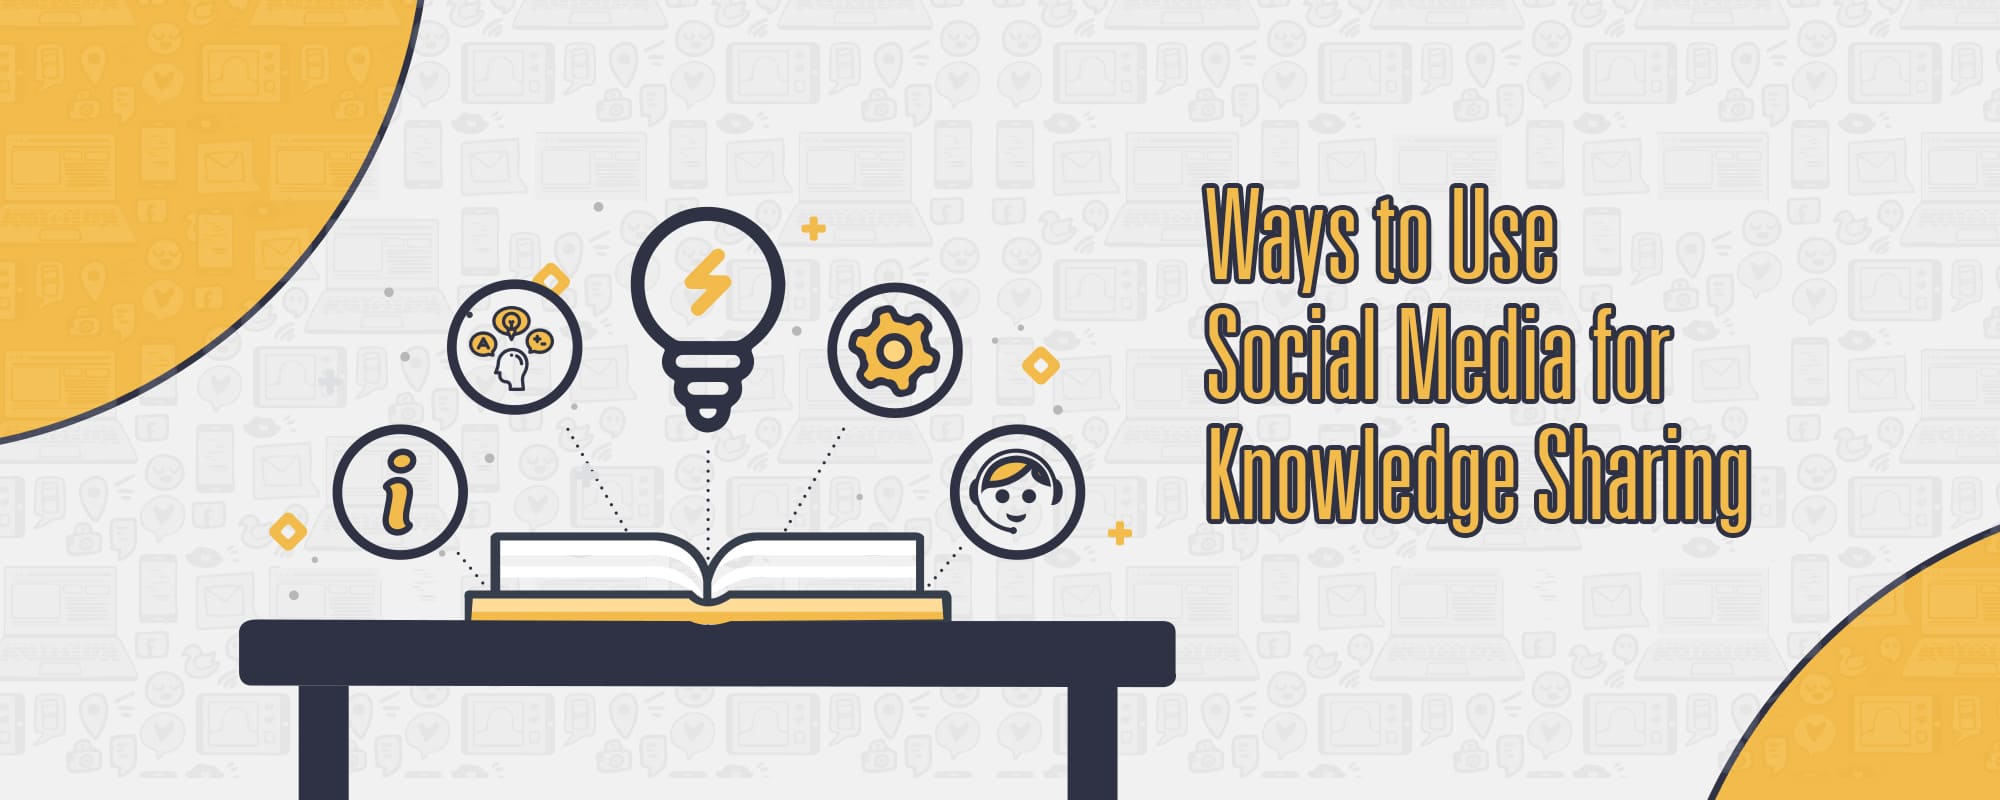 3 Smart Ways to Use Social Media for Knowledge Sharing